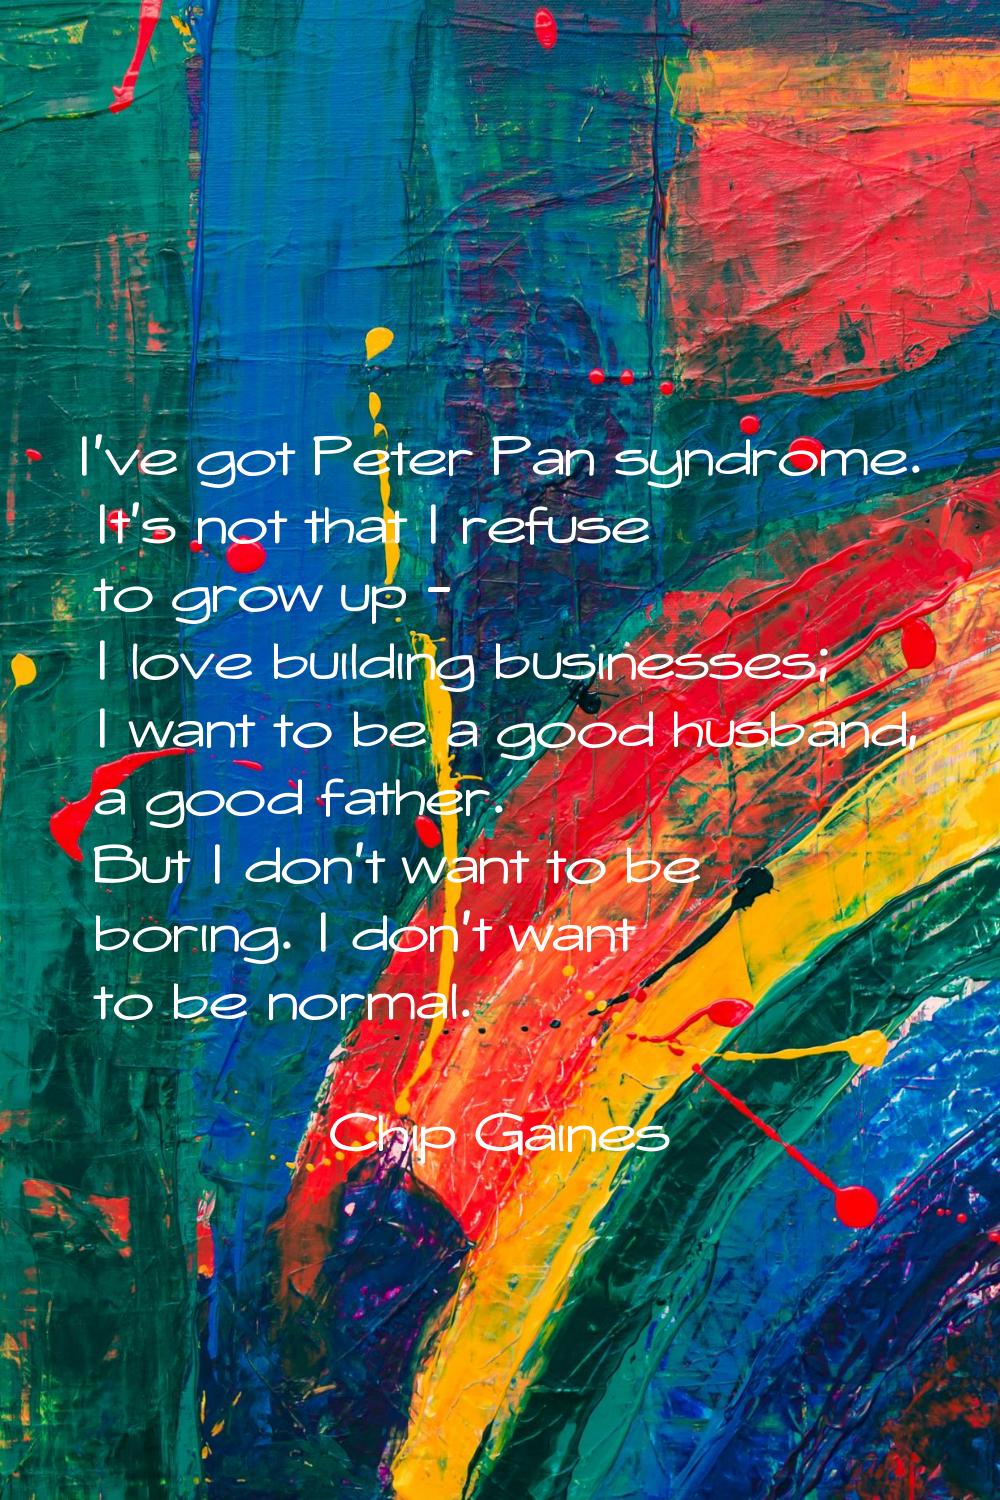 I've got Peter Pan syndrome. It's not that I refuse to grow up - I love building businesses; I want